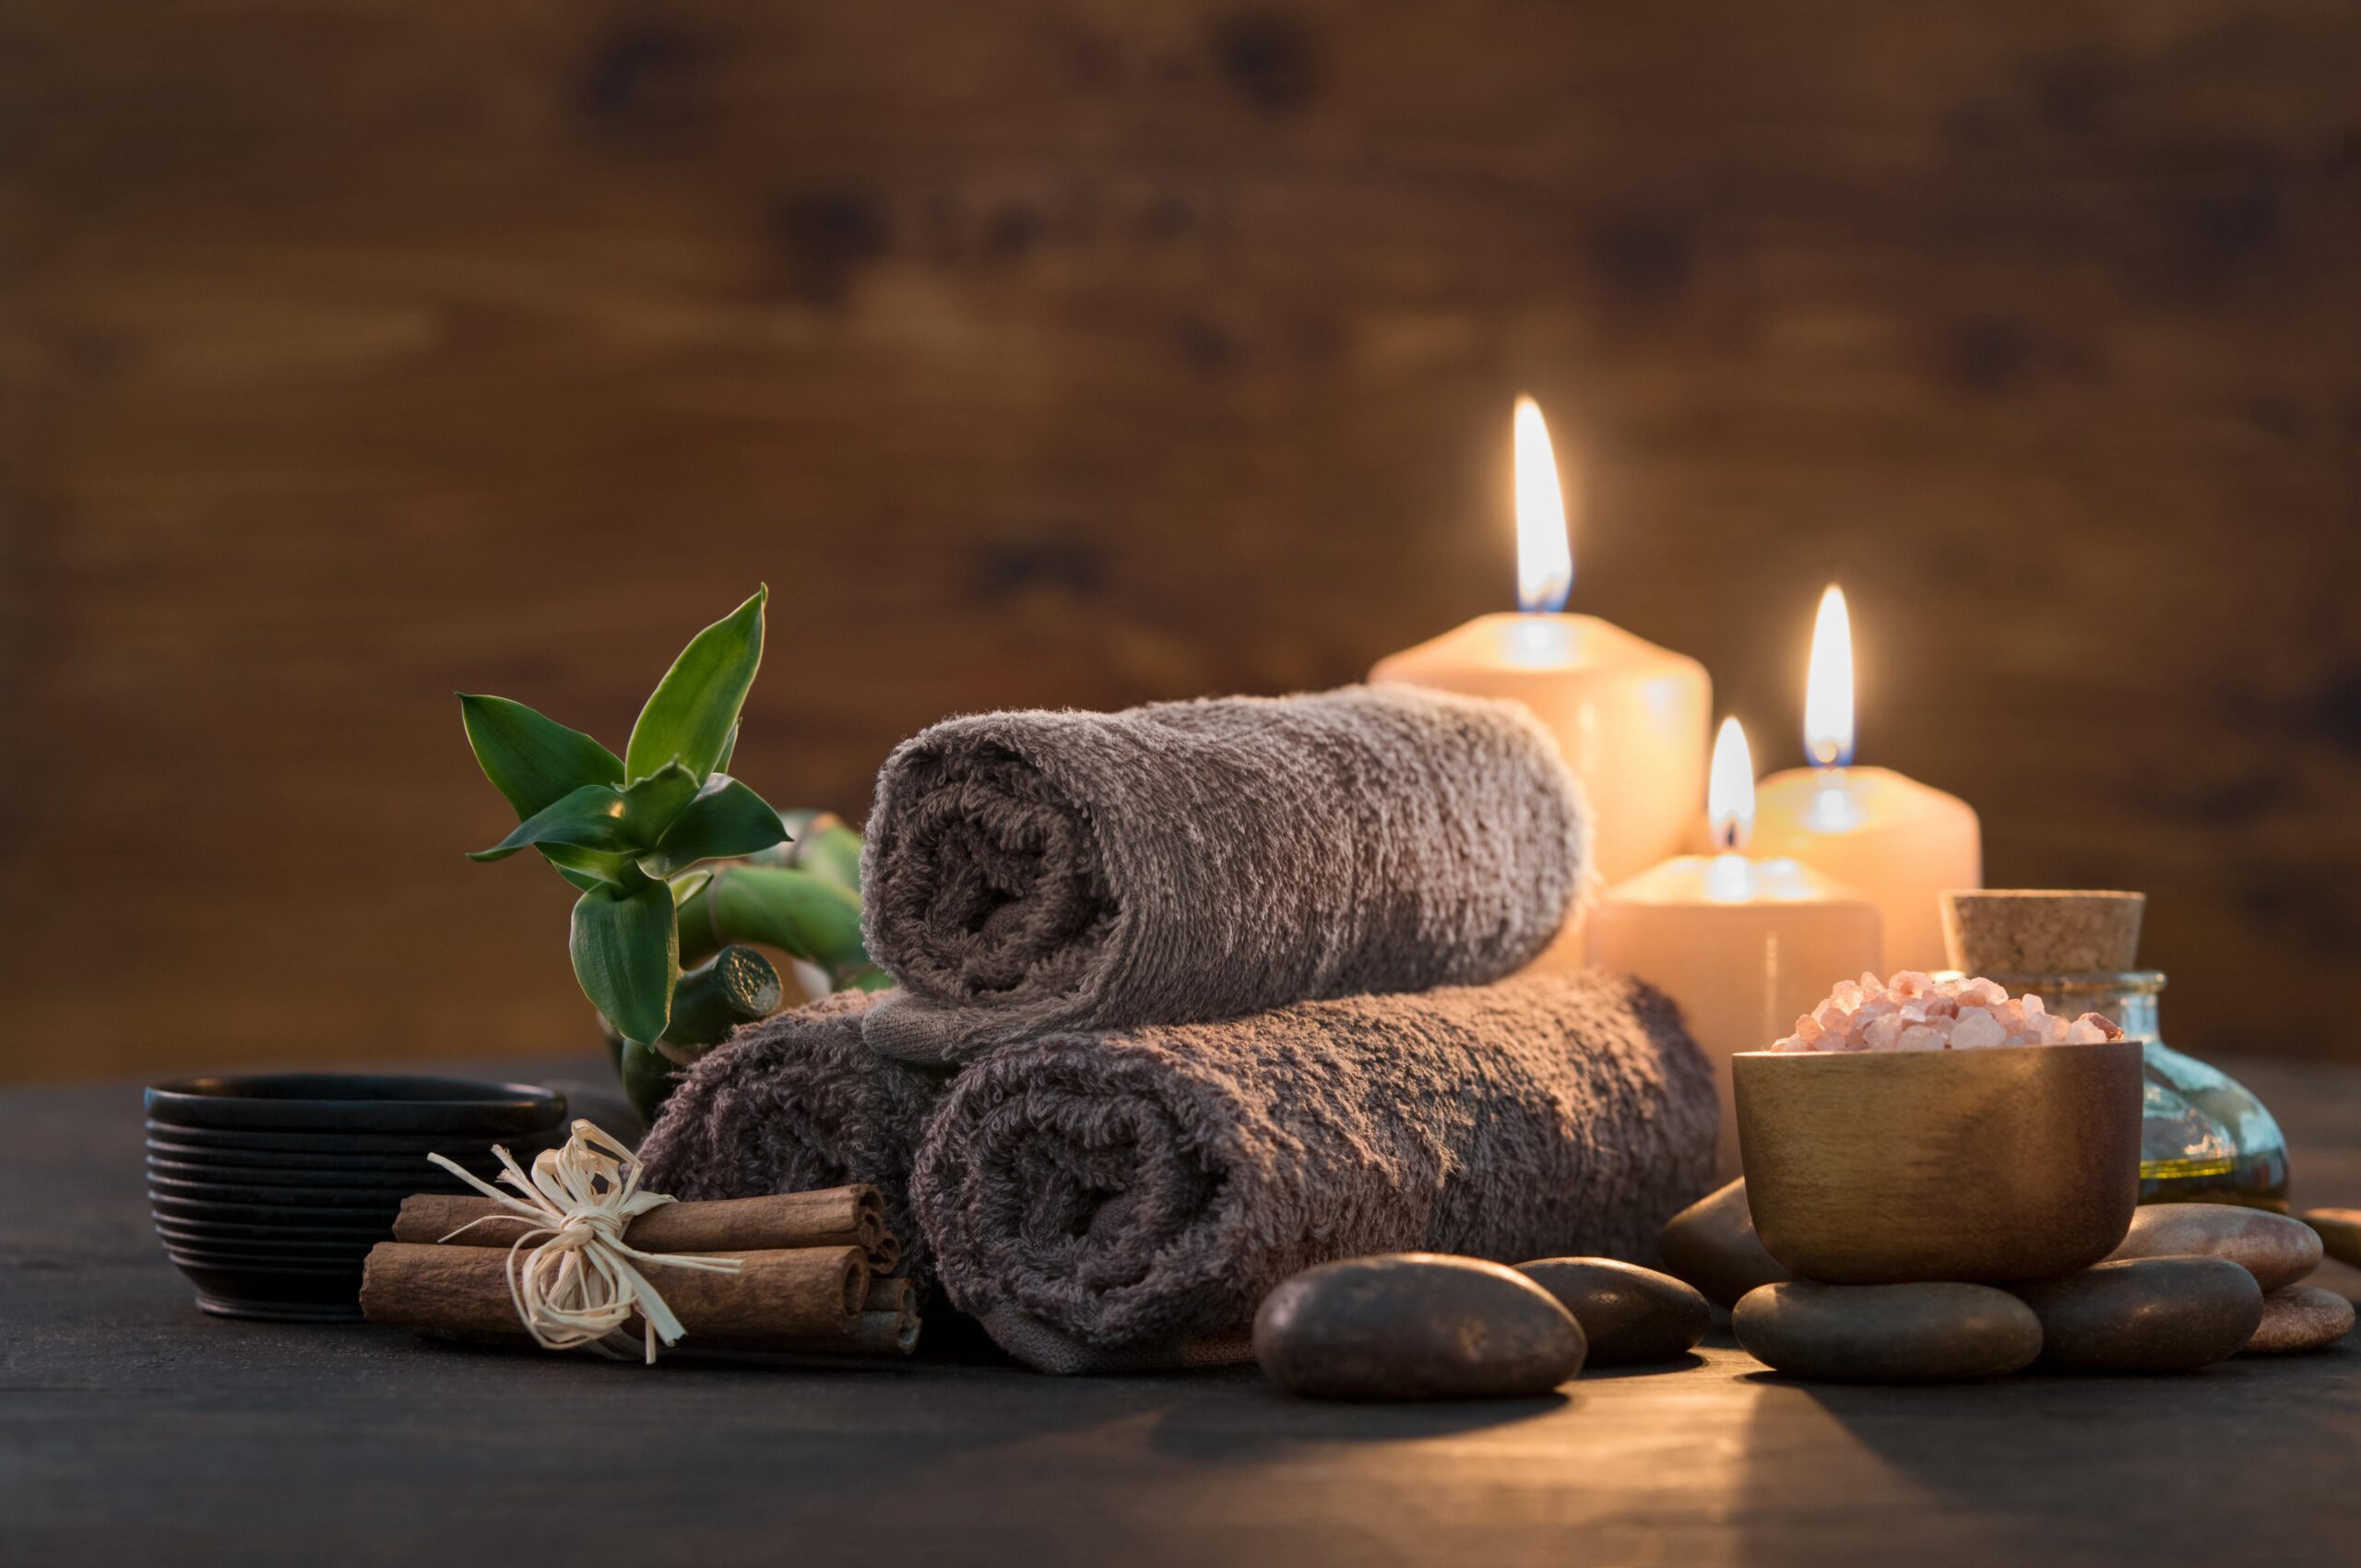 Brown towels with bamboo and candles for relax spa massage and body treatment. Beautiful composition with candles, spa stones and salt on wooden background. Spa and wellness setting ready for beauty treatment.